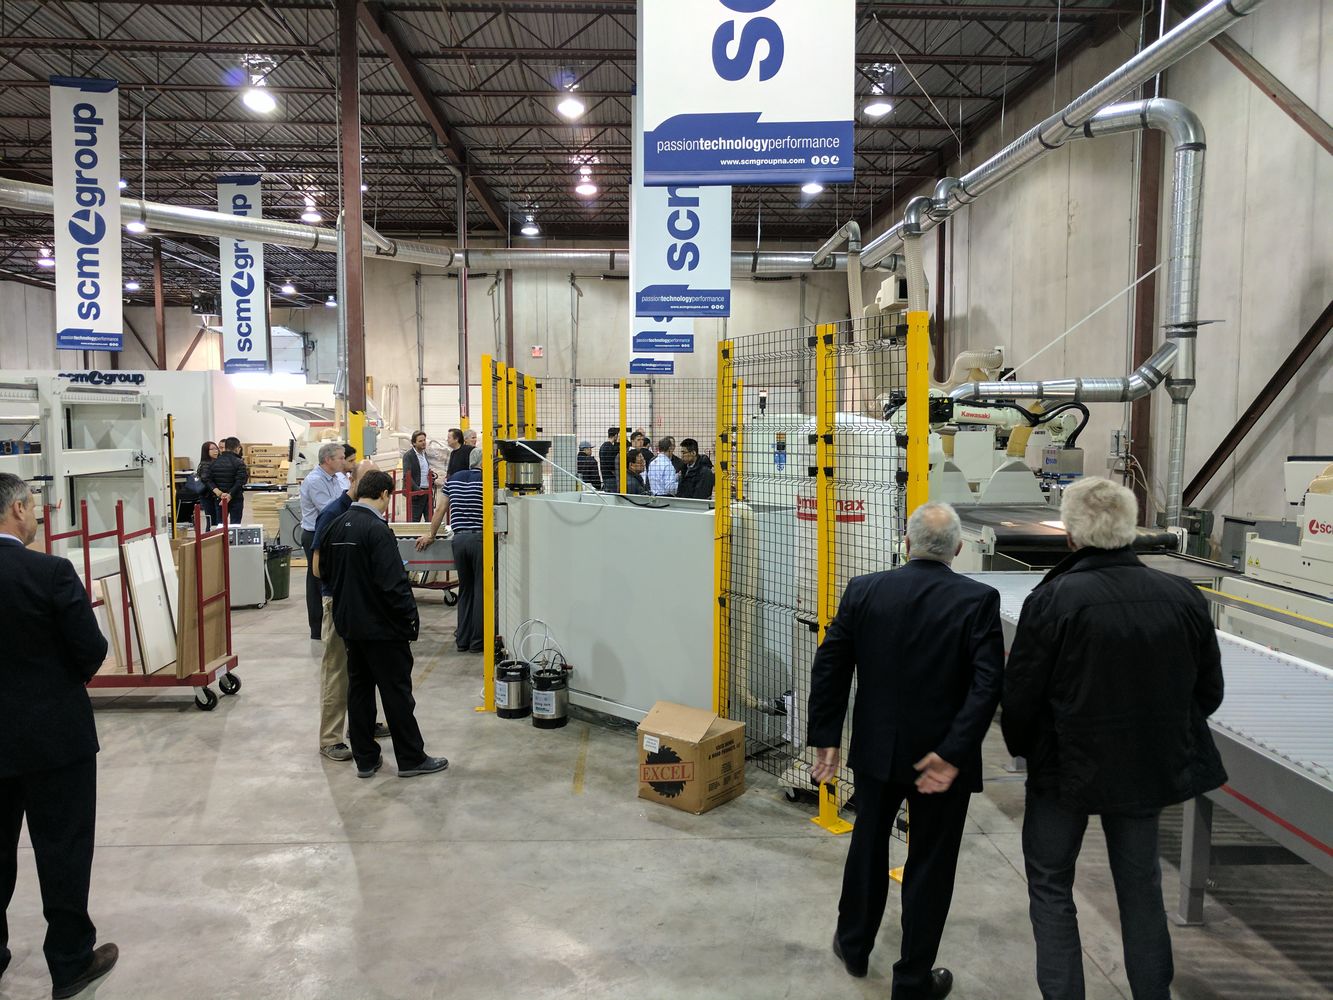 Great success for the Lean Cell 2016 Show in Toronto